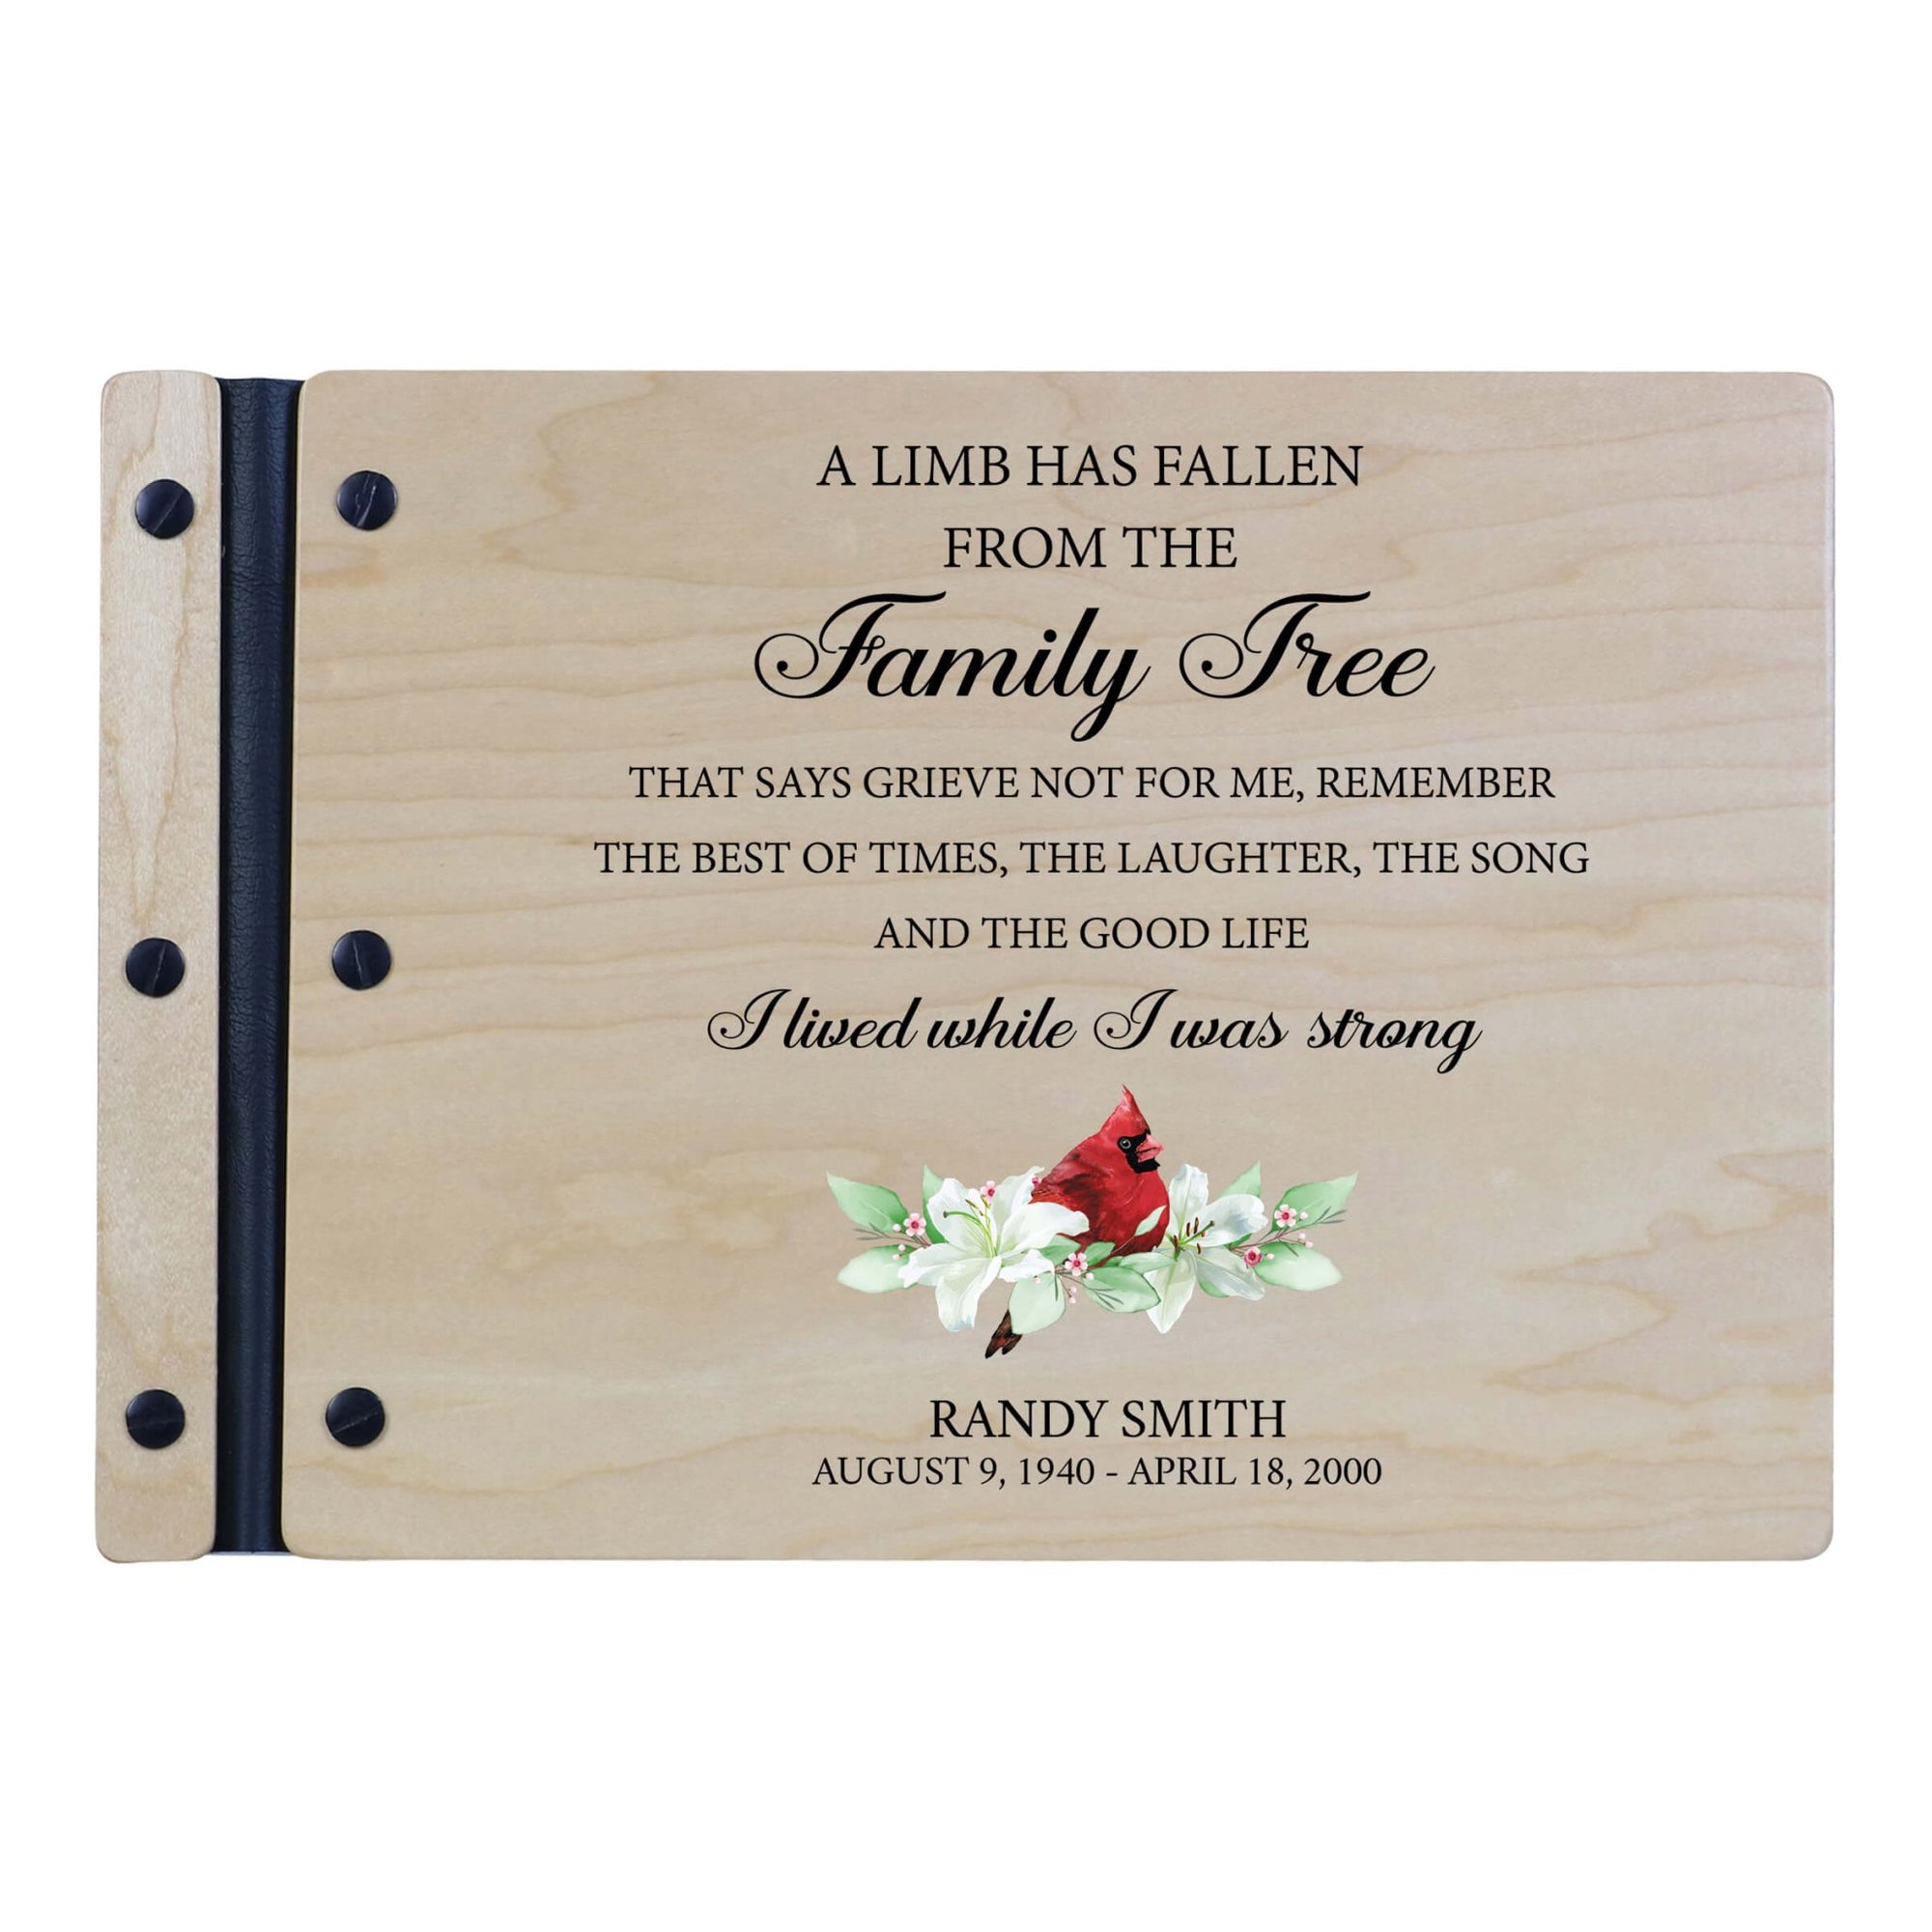 Personalized Funeral Wooden Guestbook for Memorial Service - A Limb Has Fallen - LifeSong Milestones